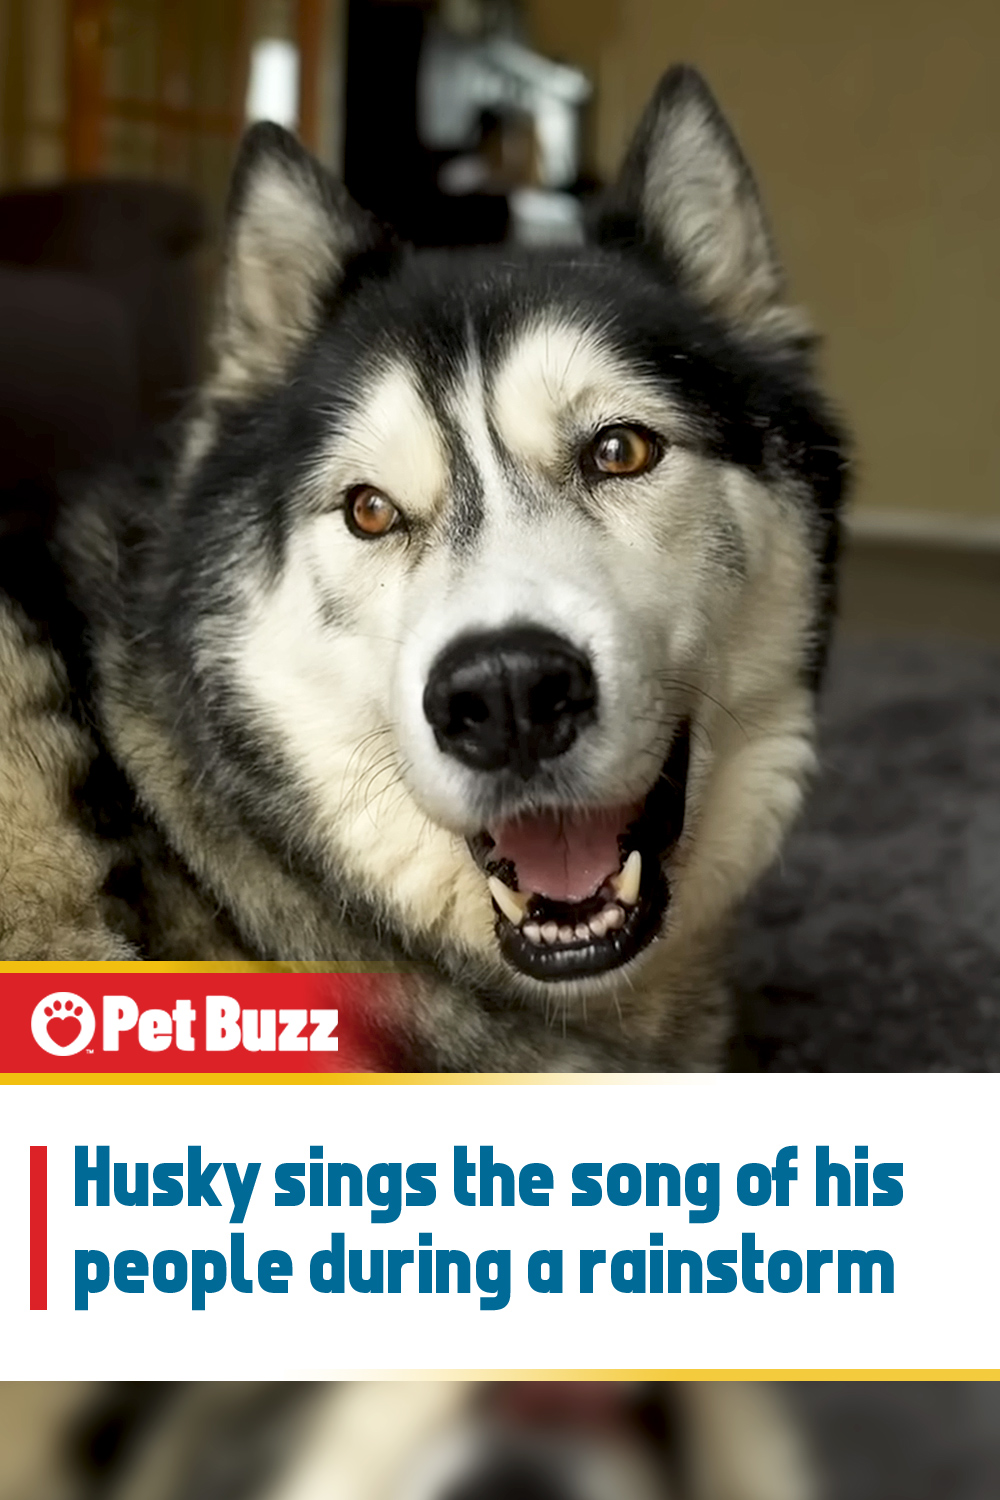 Husky sings the song of his people during a rainstorm